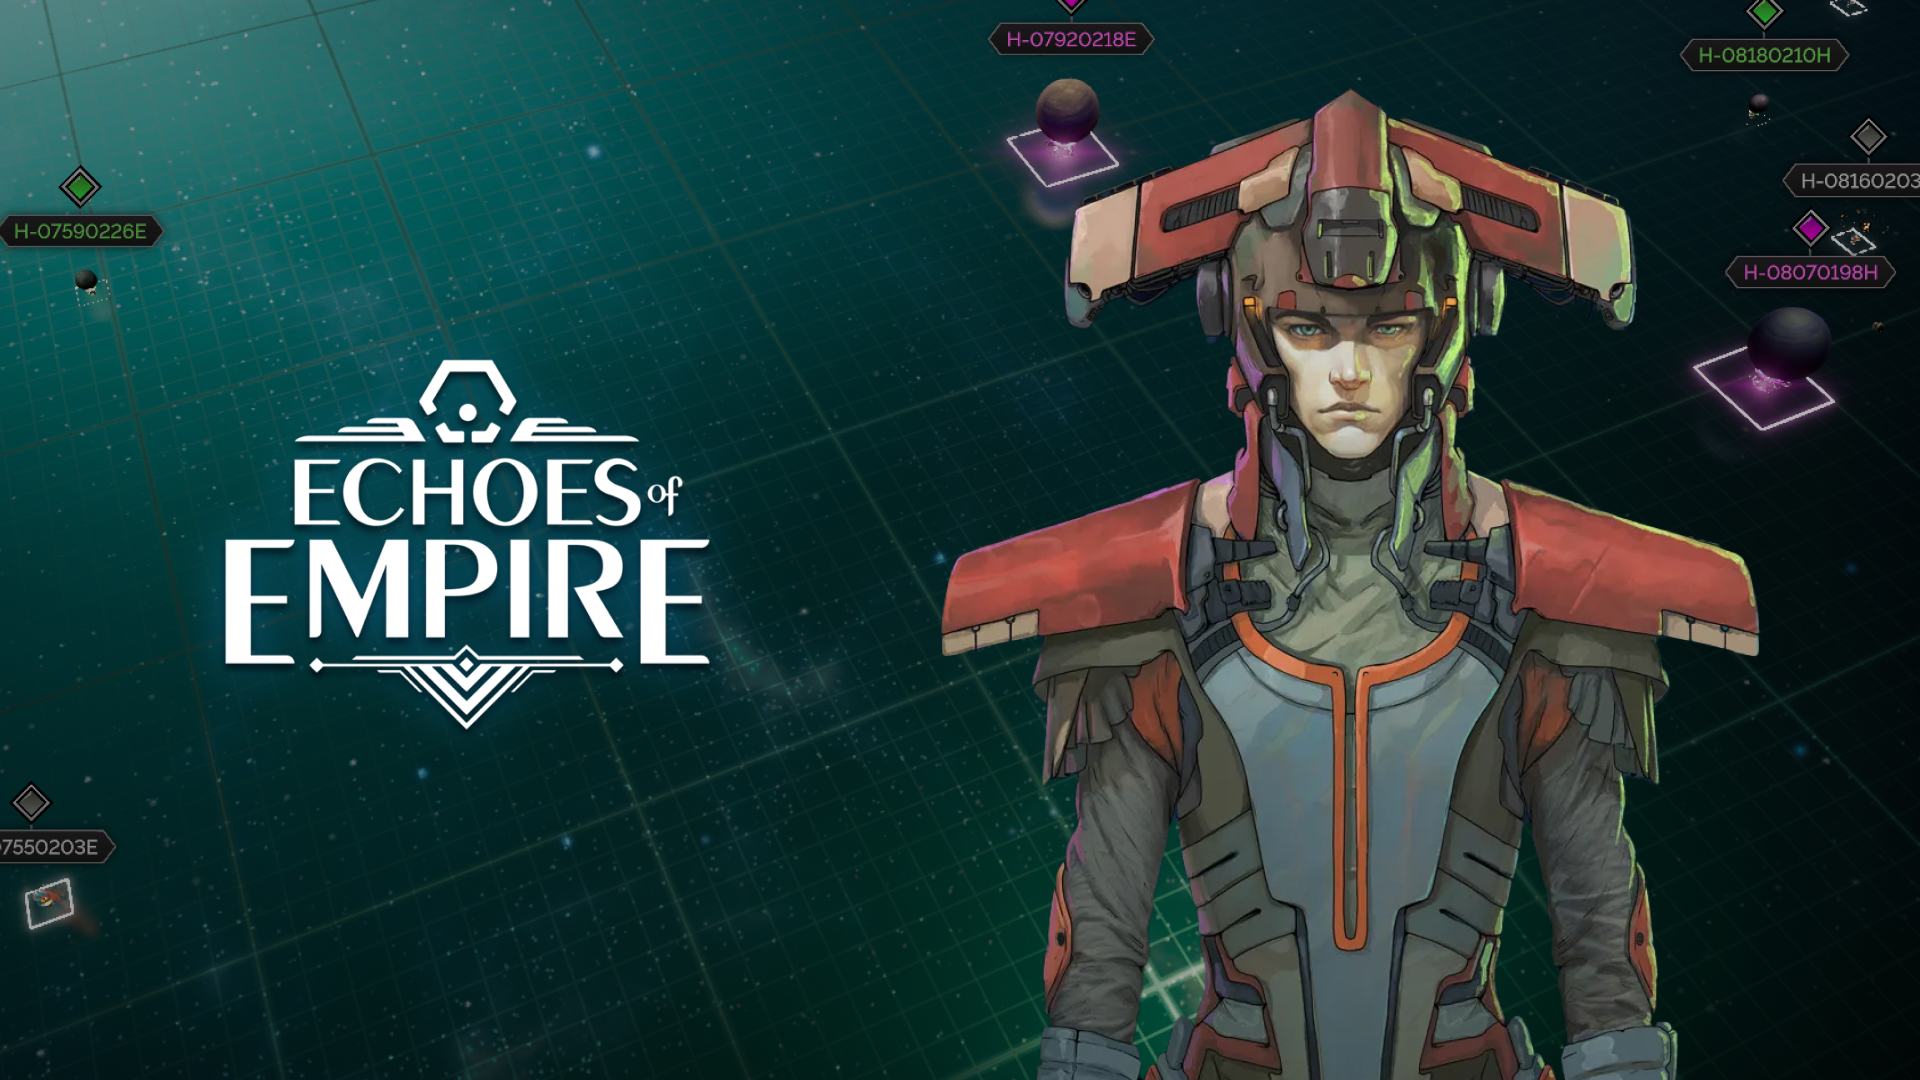 Echoes of Empire is a free-to-play 4X strategy game of galactic proportions with real player rewards in $GALA.